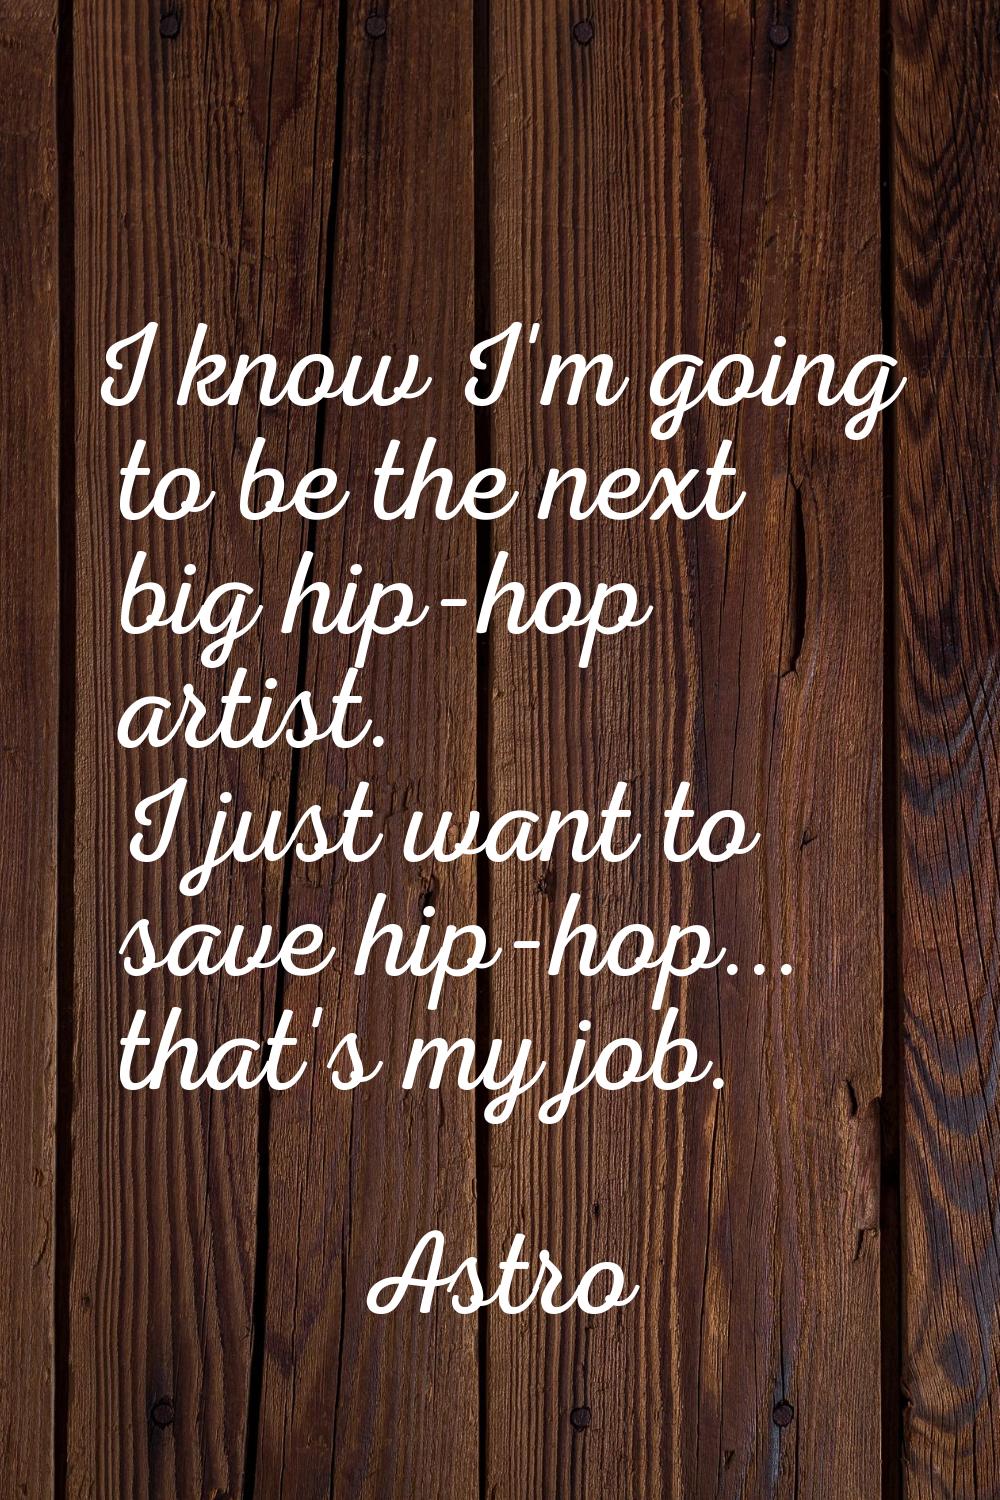 I know I'm going to be the next big hip-hop artist. I just want to save hip-hop... that's my job.